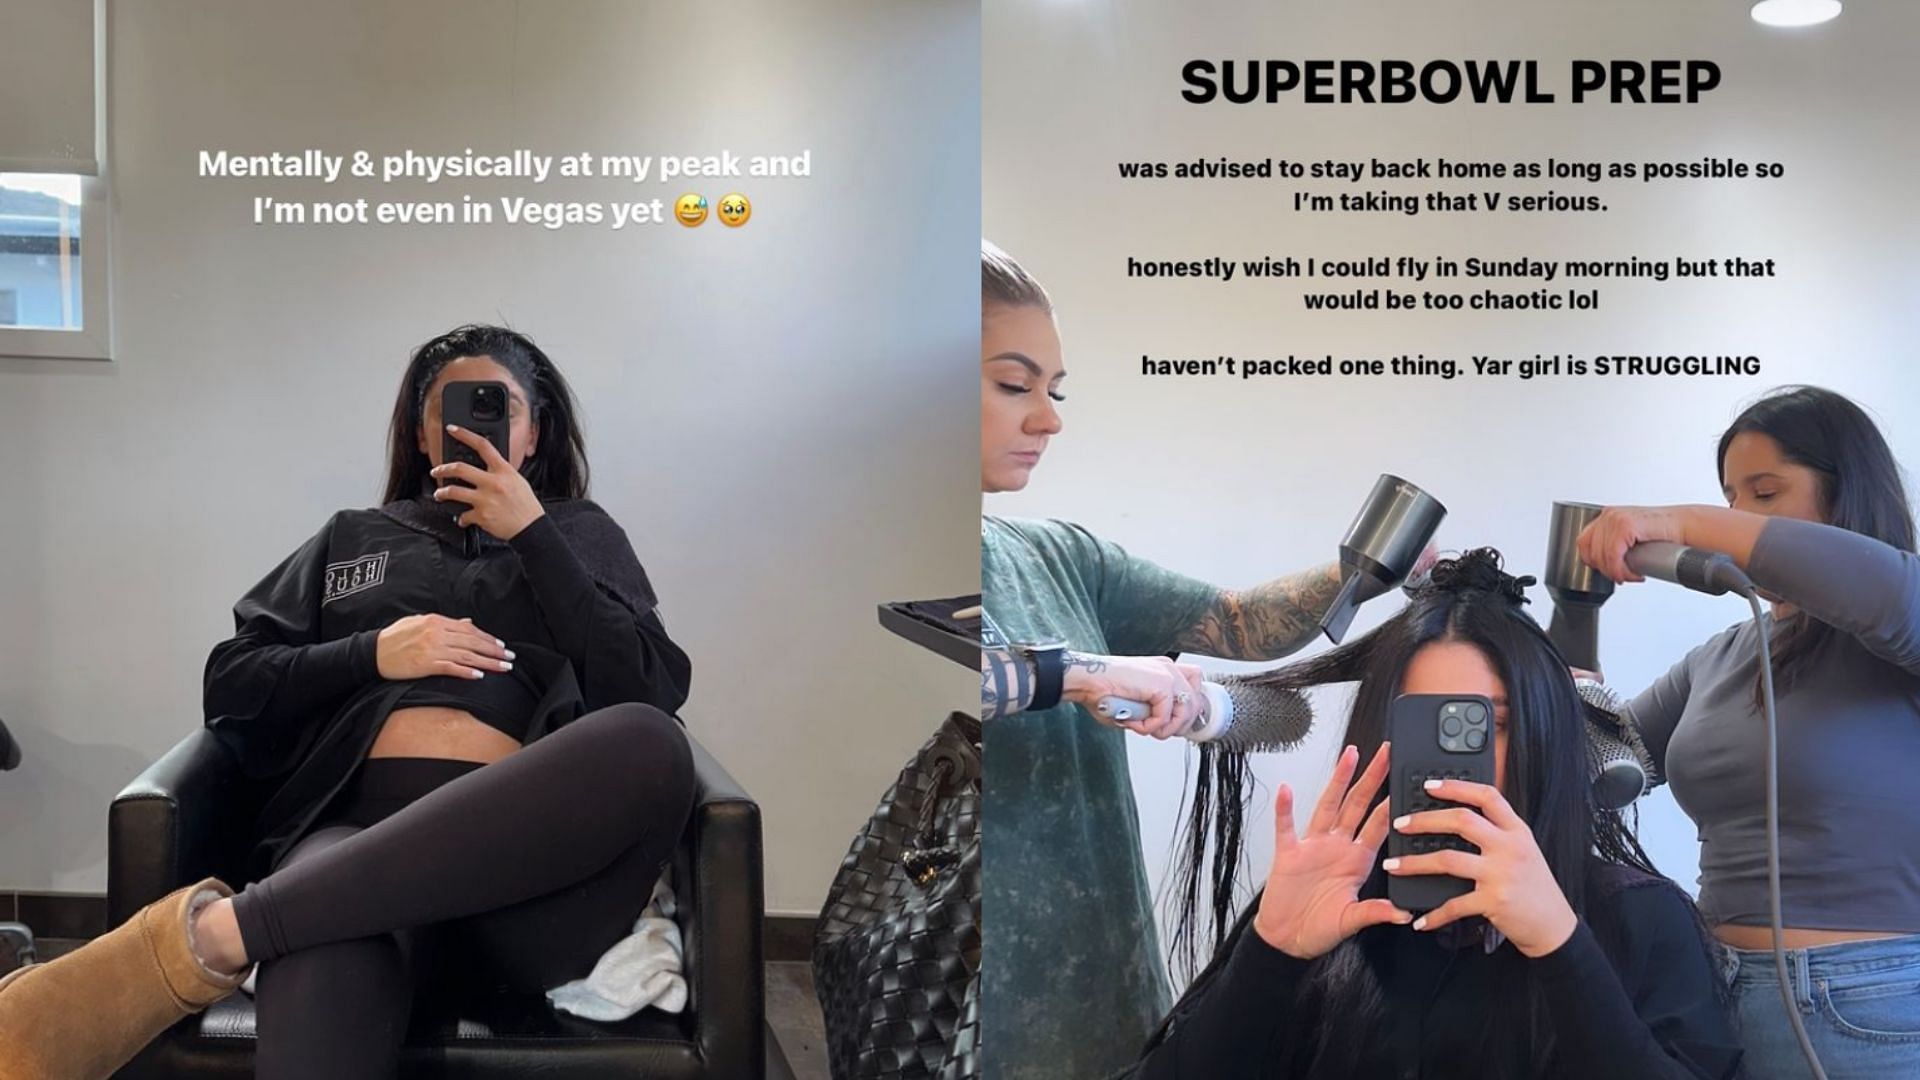 Sydney Warner shared the precautions she is taking in order to attend the Super Bowl, as she is just weeks from having her first baby.